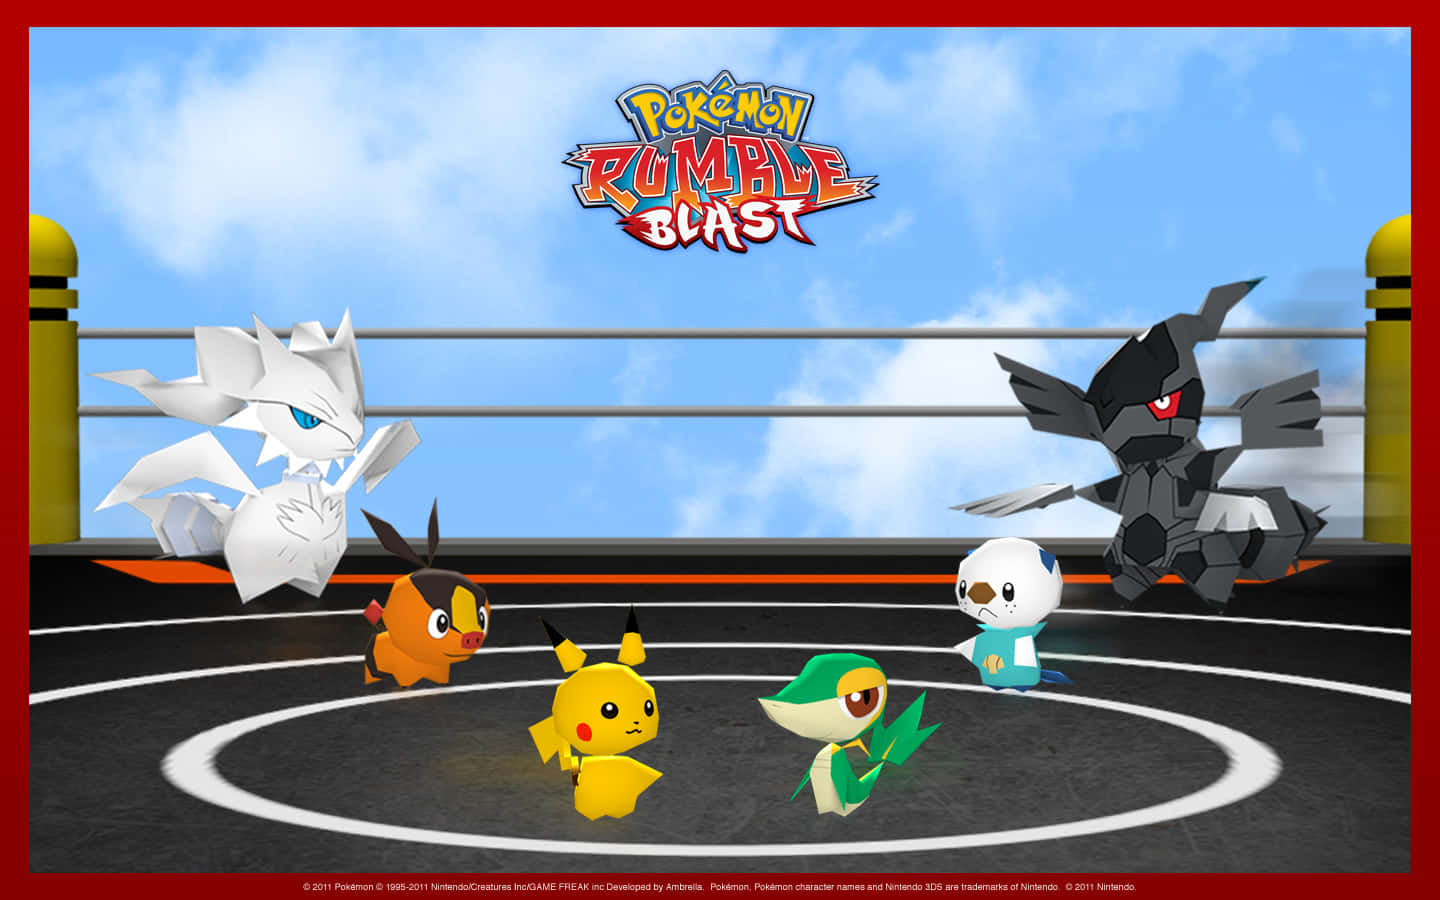 Pokemon Rumble lets you battle and collect powerful pocket monsters! Wallpaper